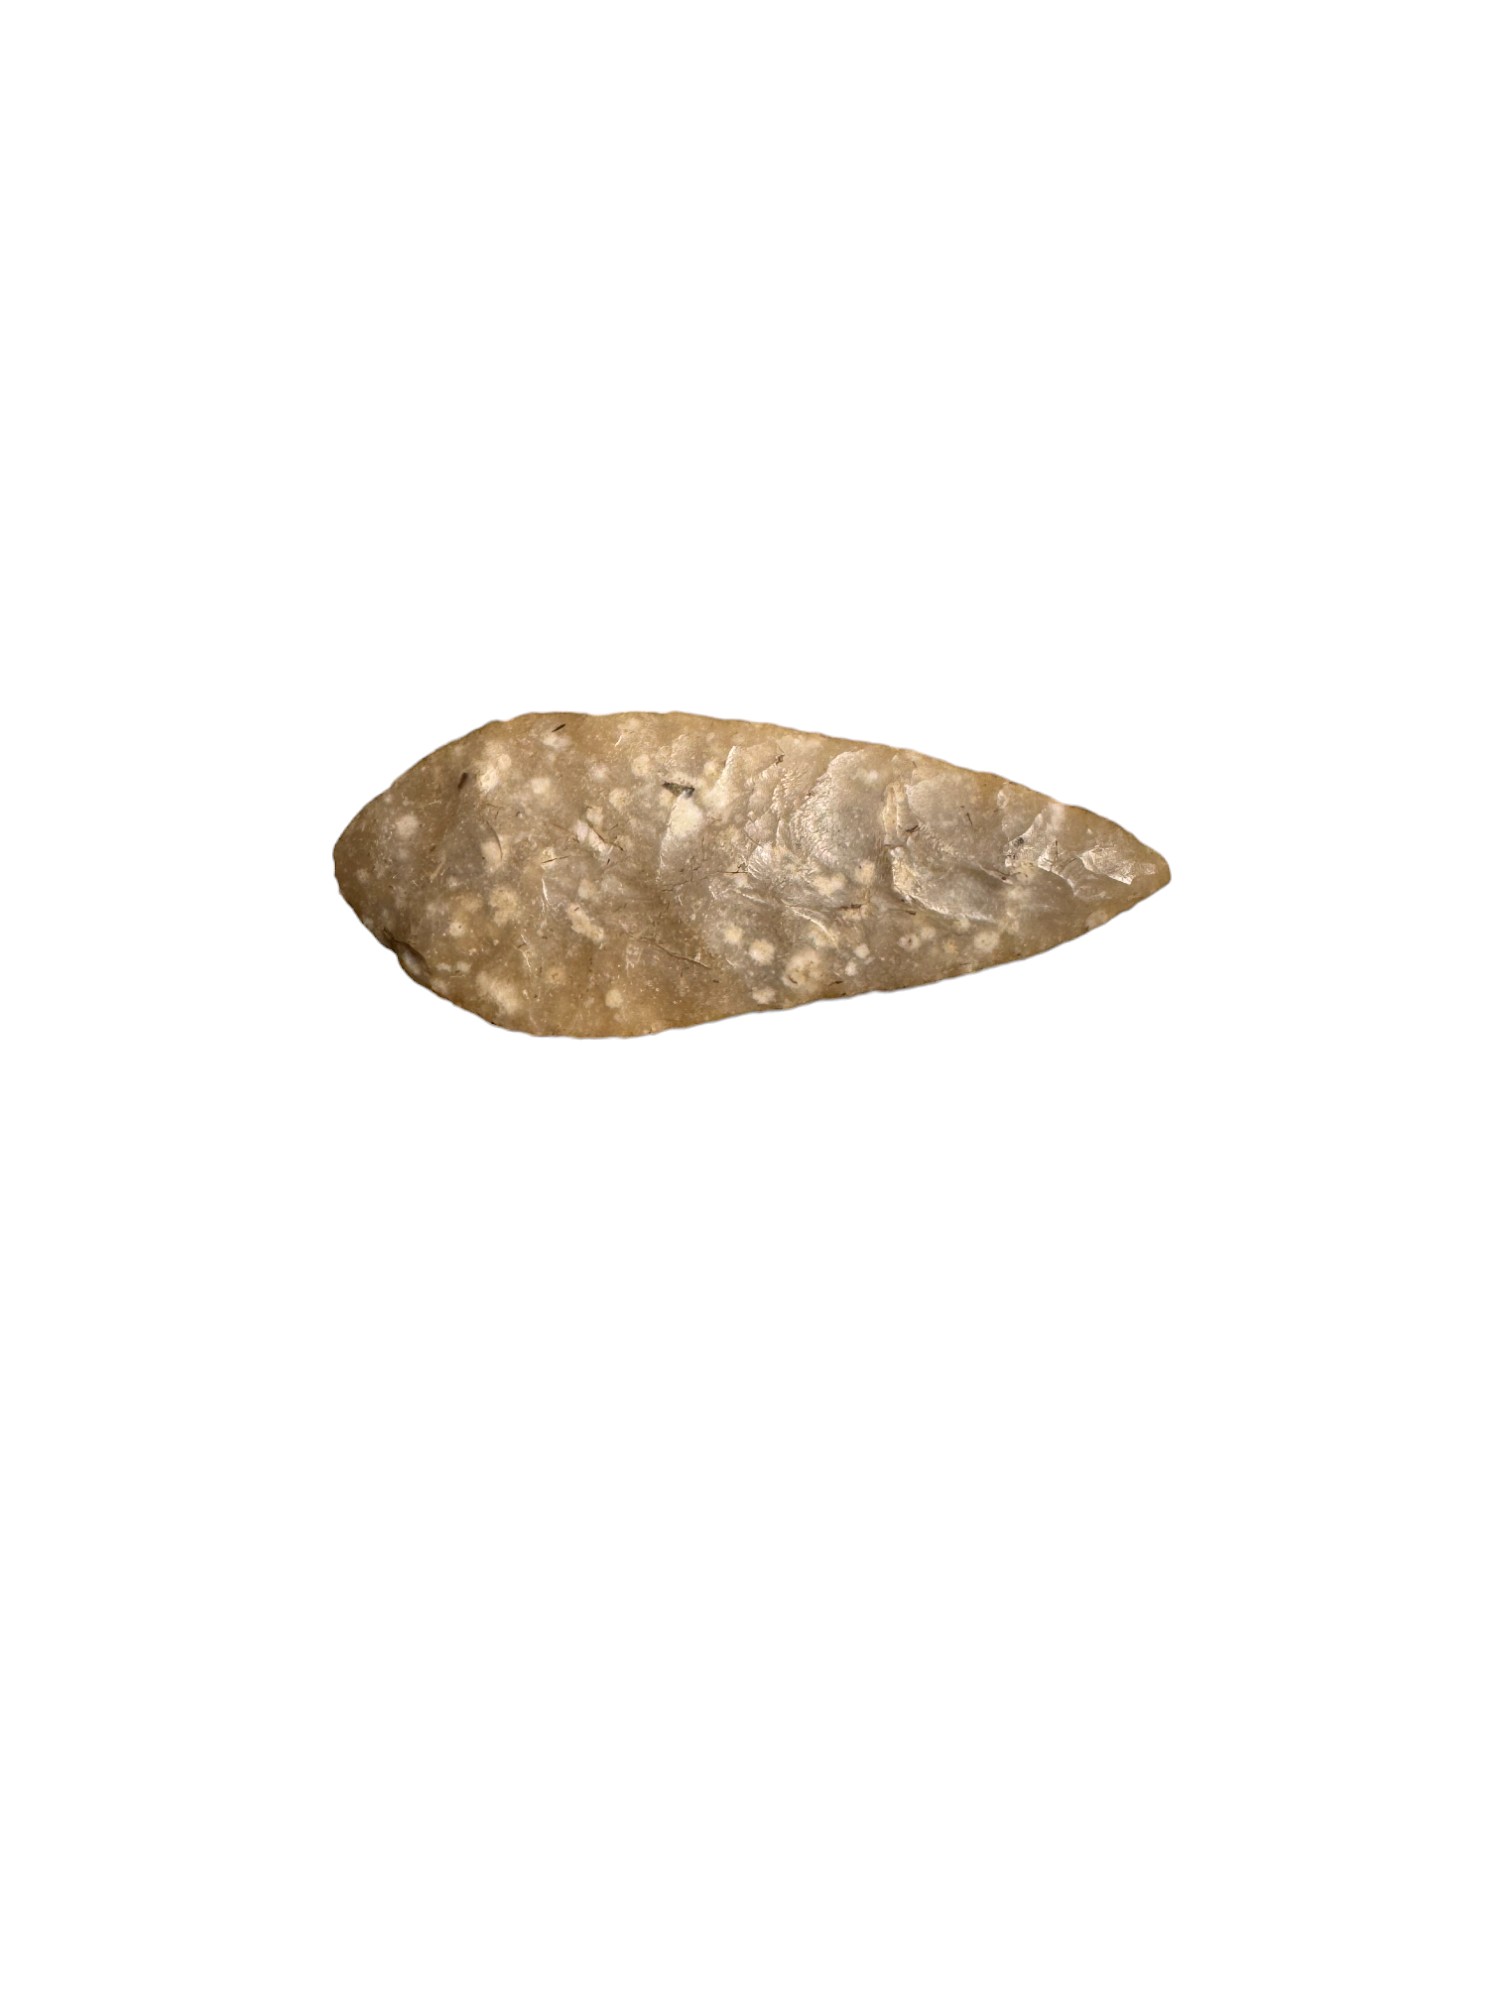 Antiquities: English Neolithic Stone Age Arrow Head, Yorkshire Find - Image 2 of 2